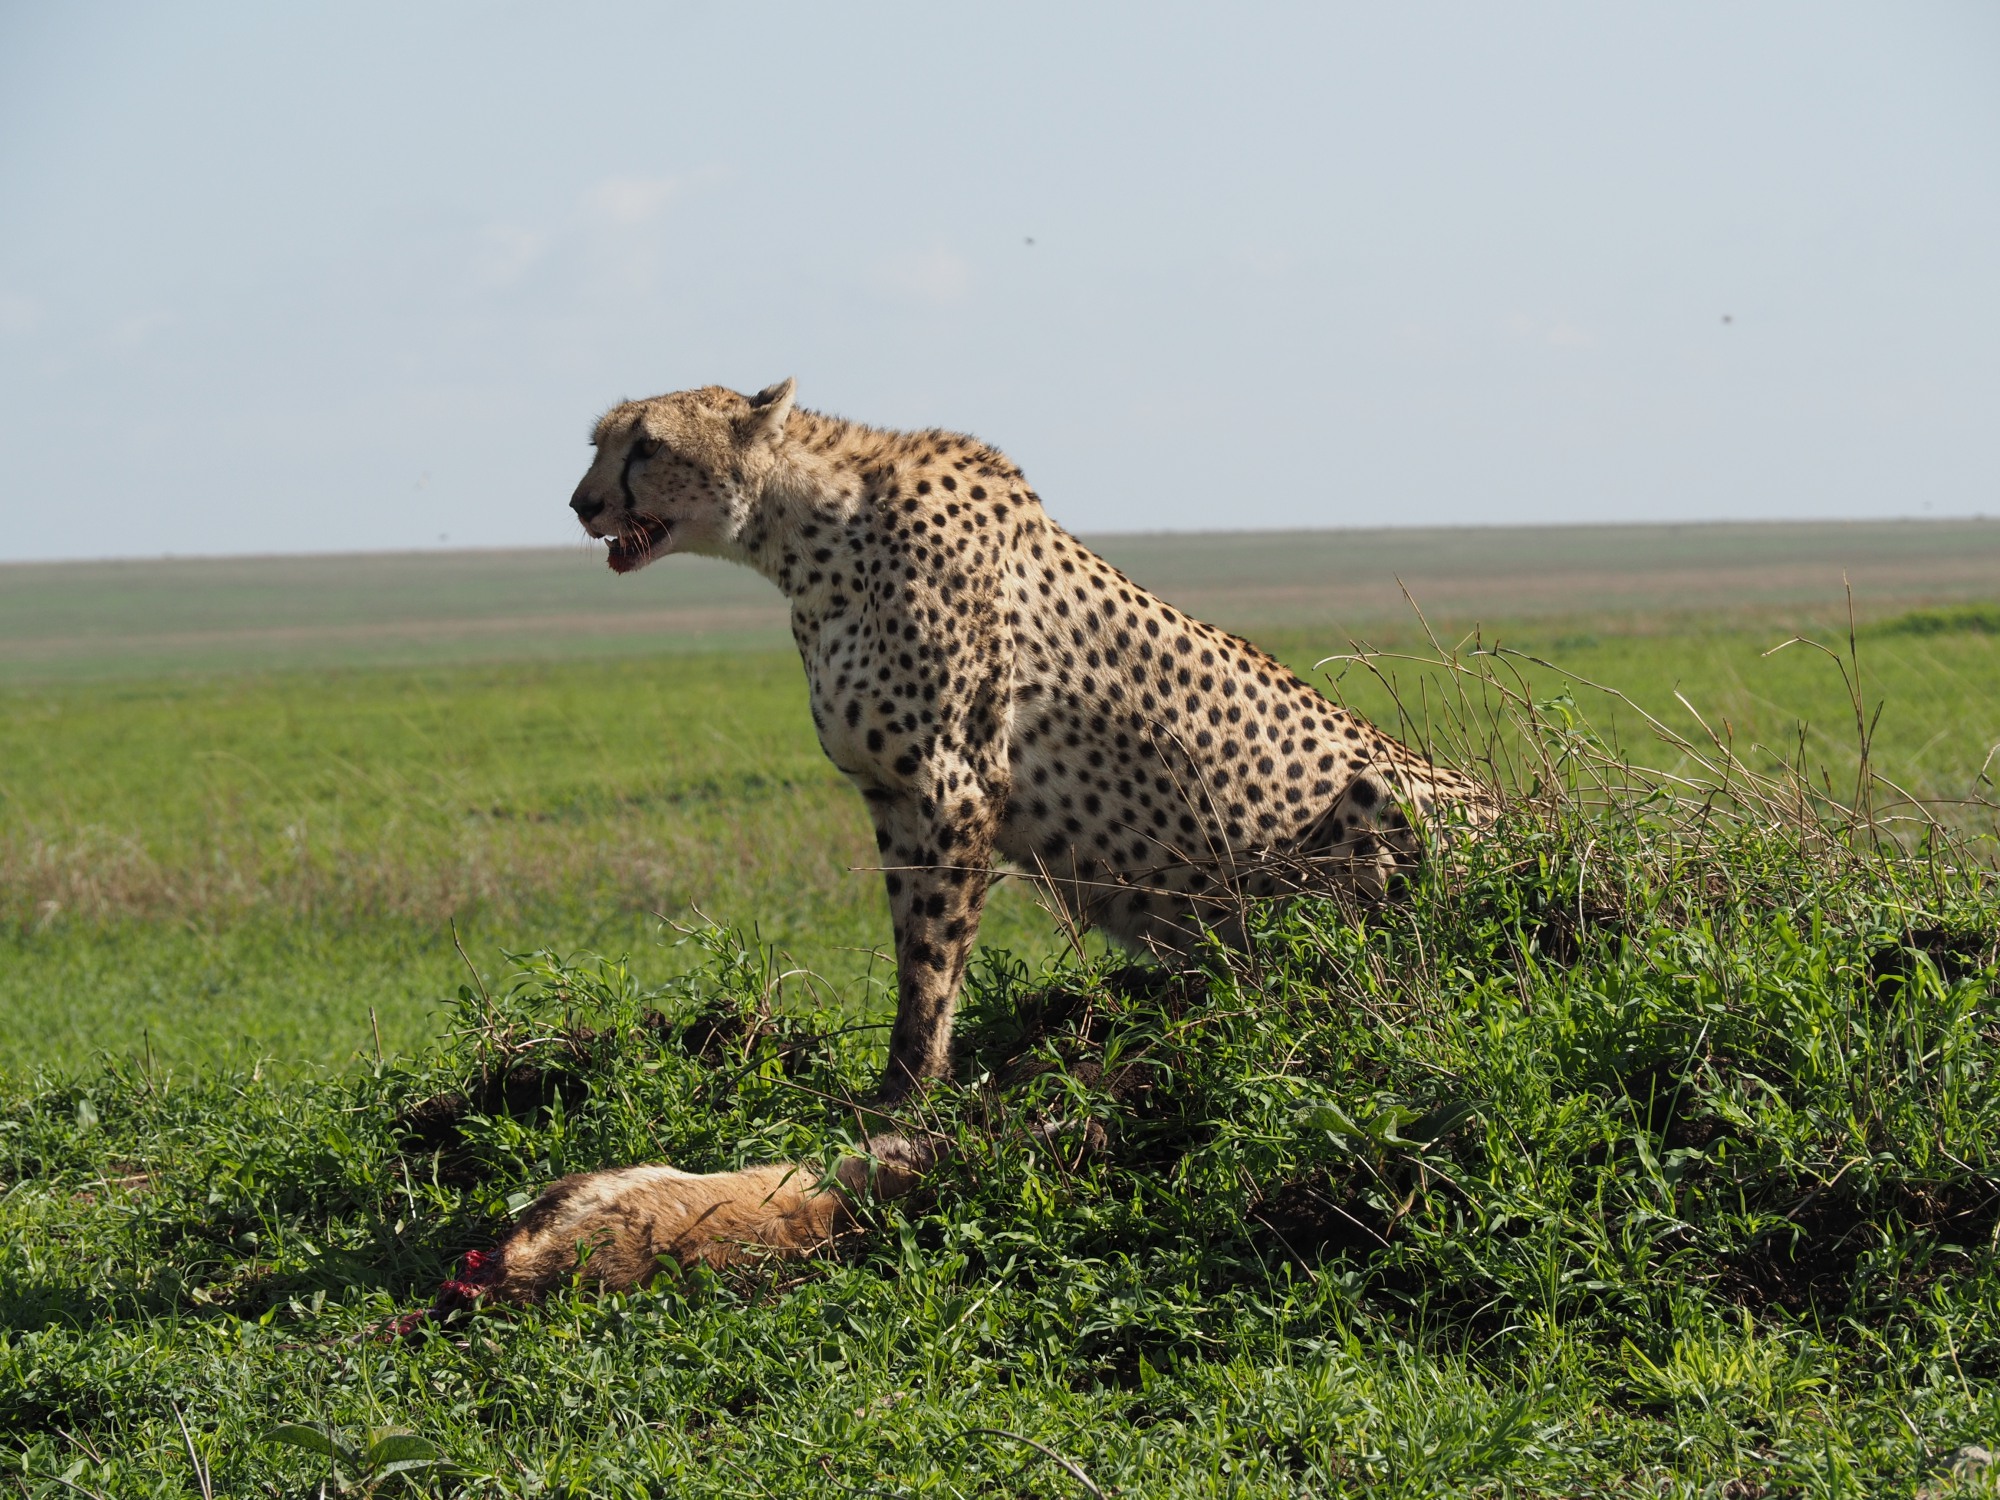 Keeping a watchful eye out: If a hyena arrives, the cheetah will leave in a hurry